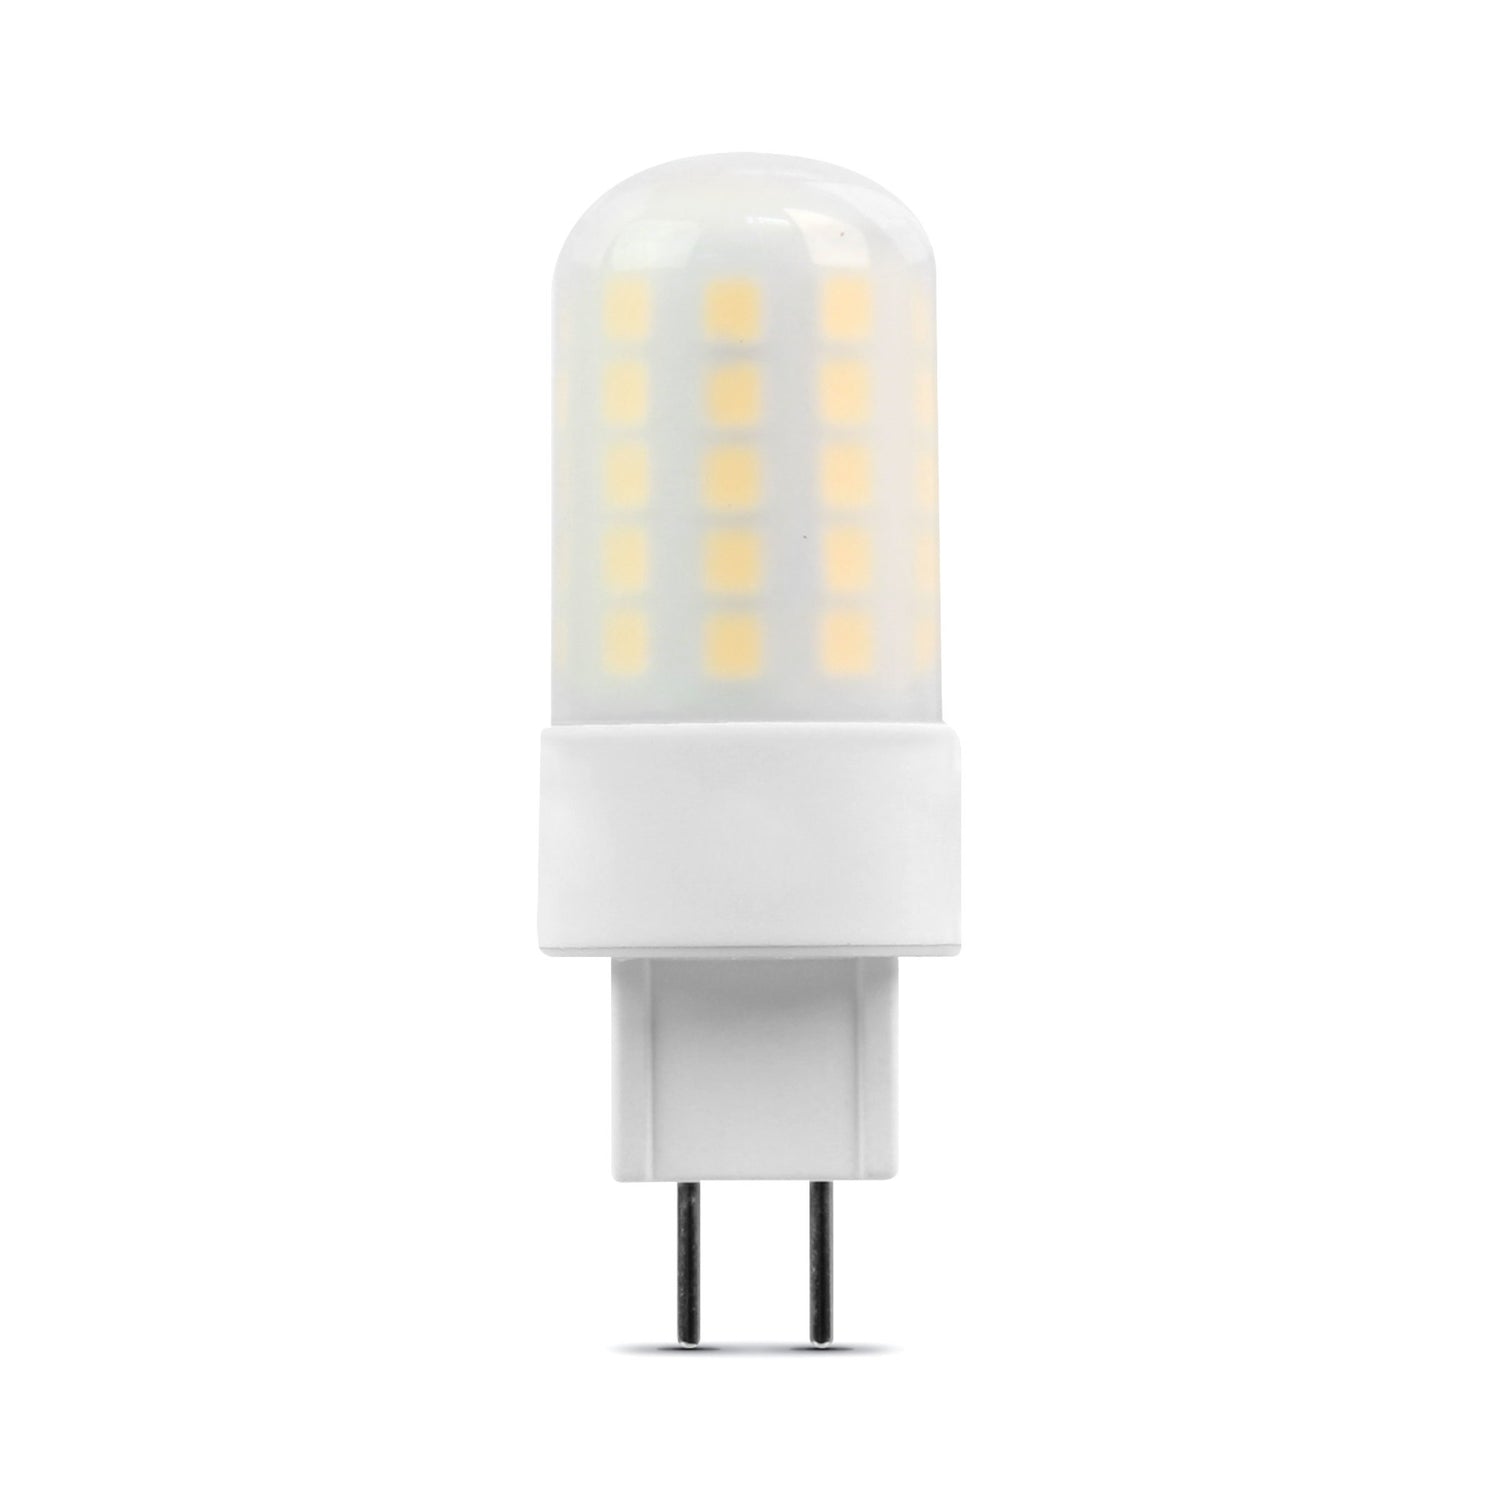 4.5W (50W Replacement) Warm White (3000K) Dimmable GY6.35 Base T4 Specialty LED